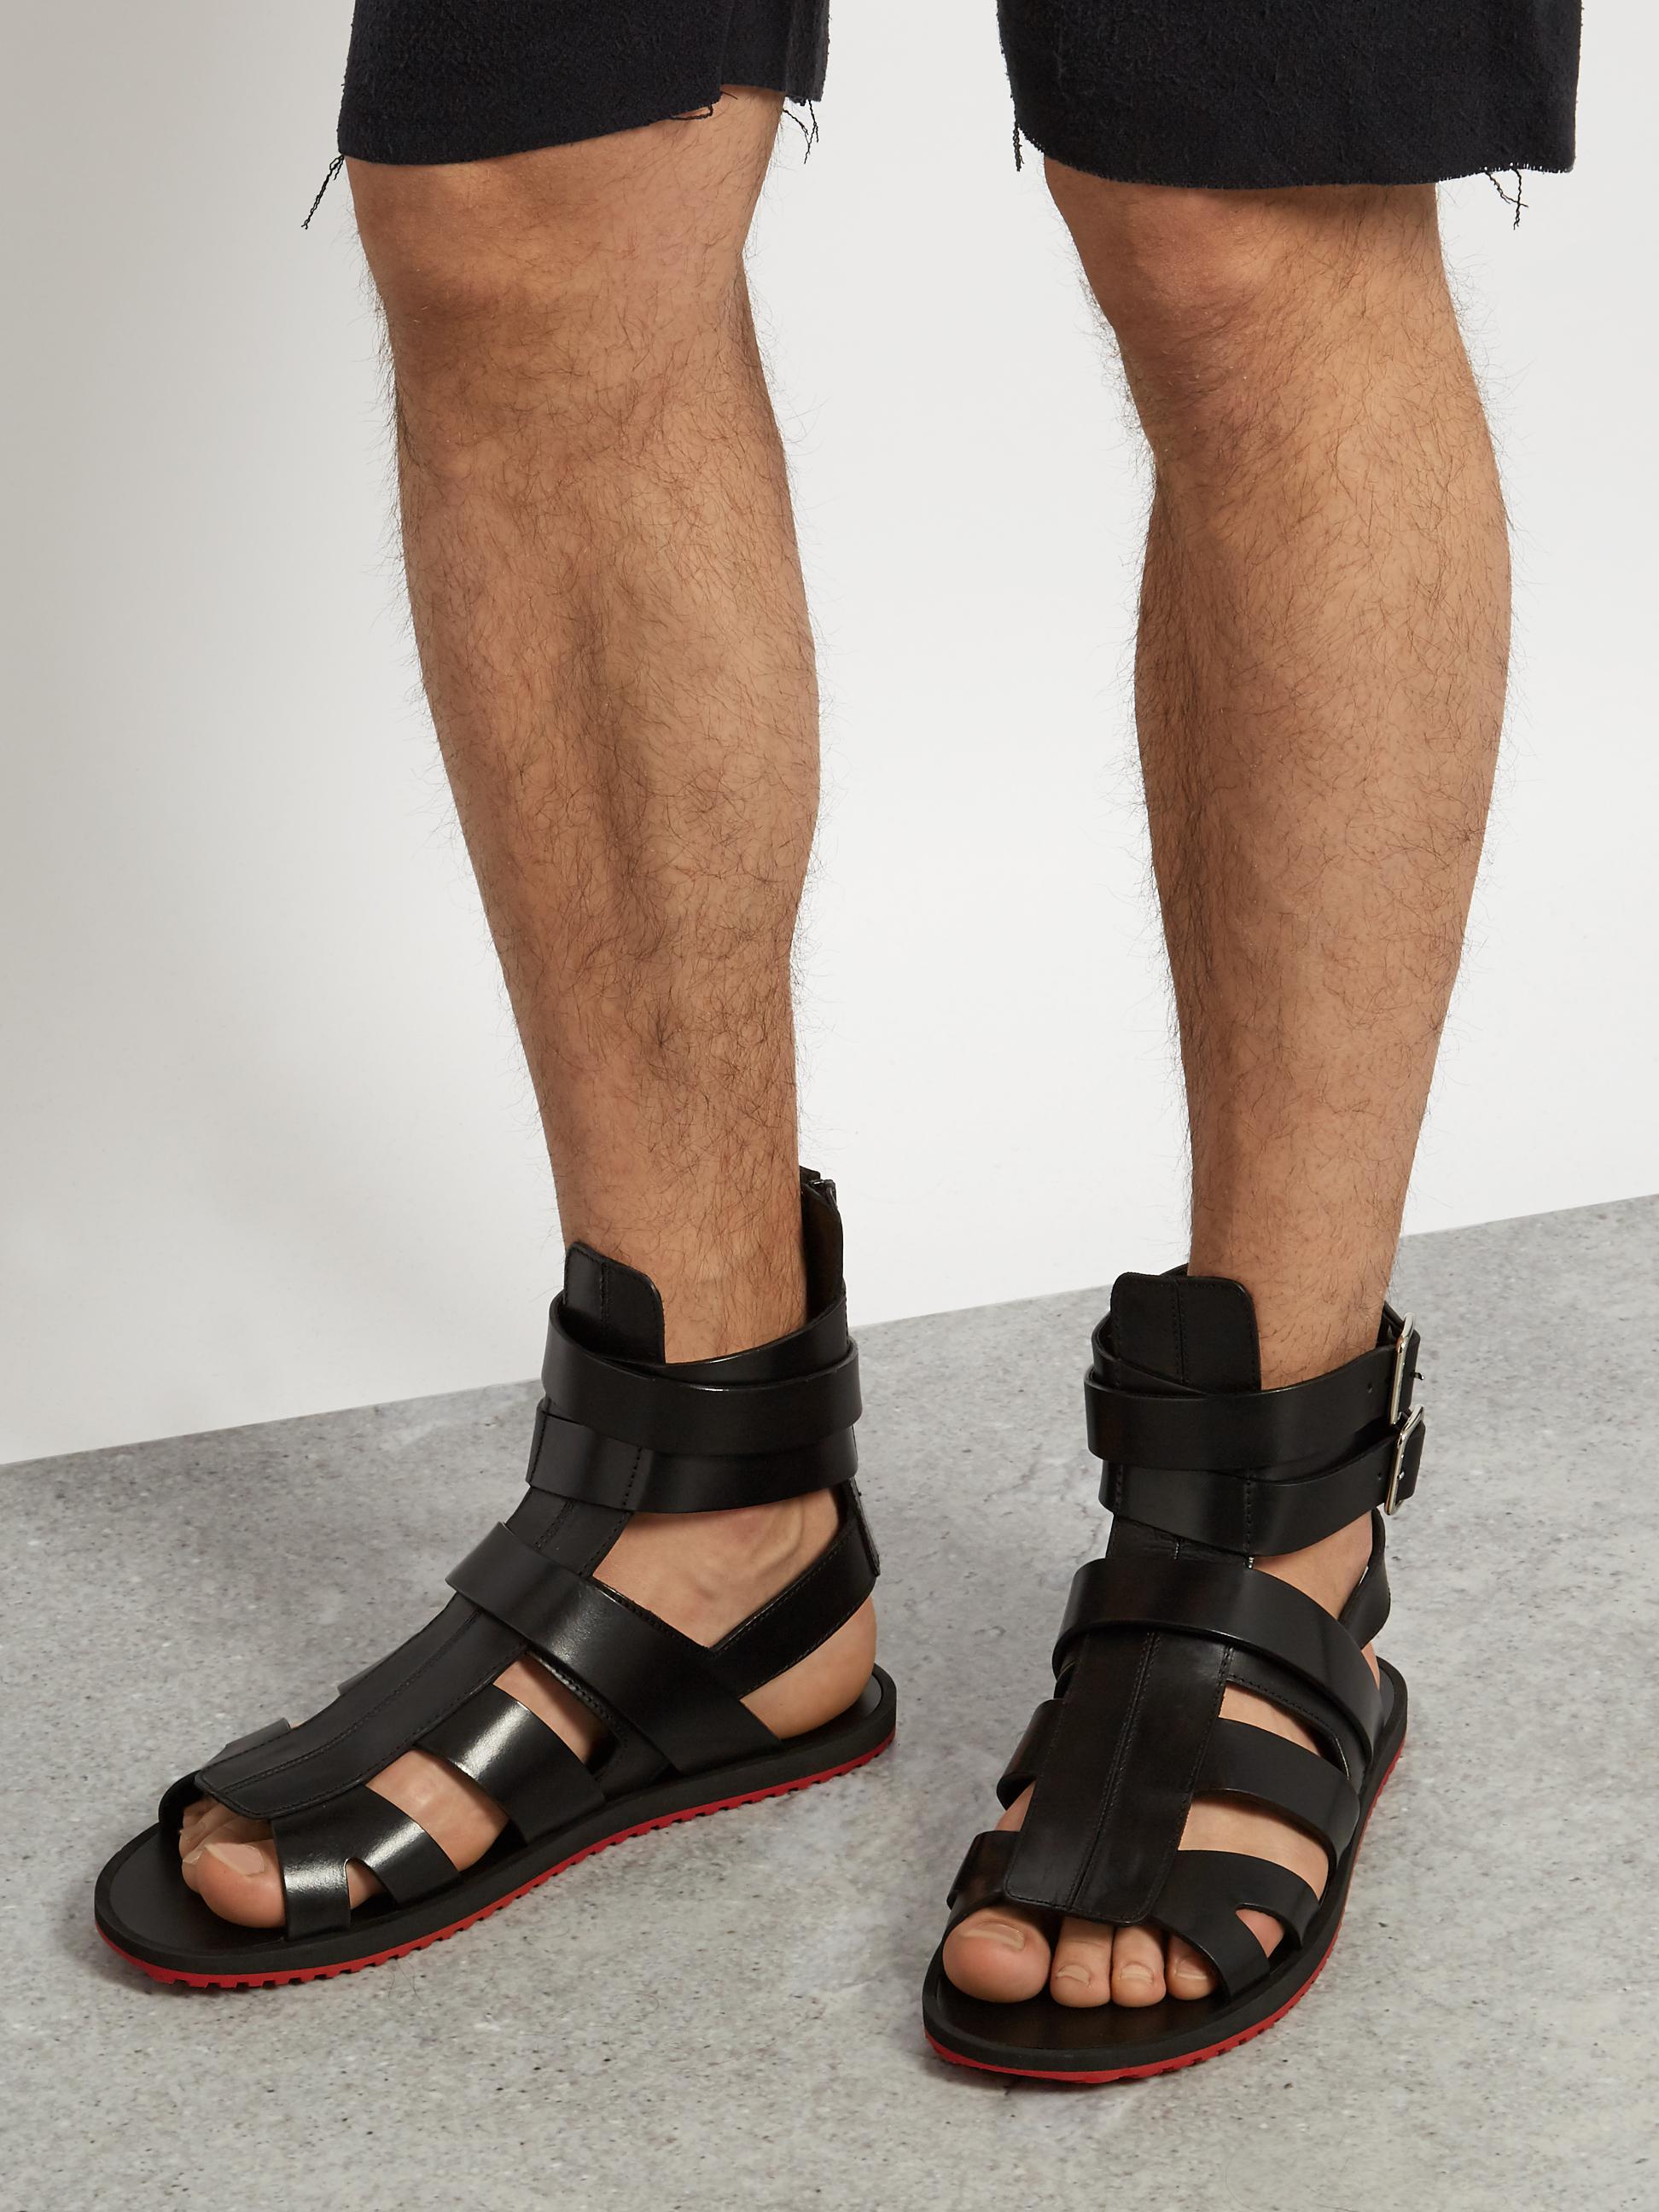 Givenchy Gladiator Leather Sandals in 